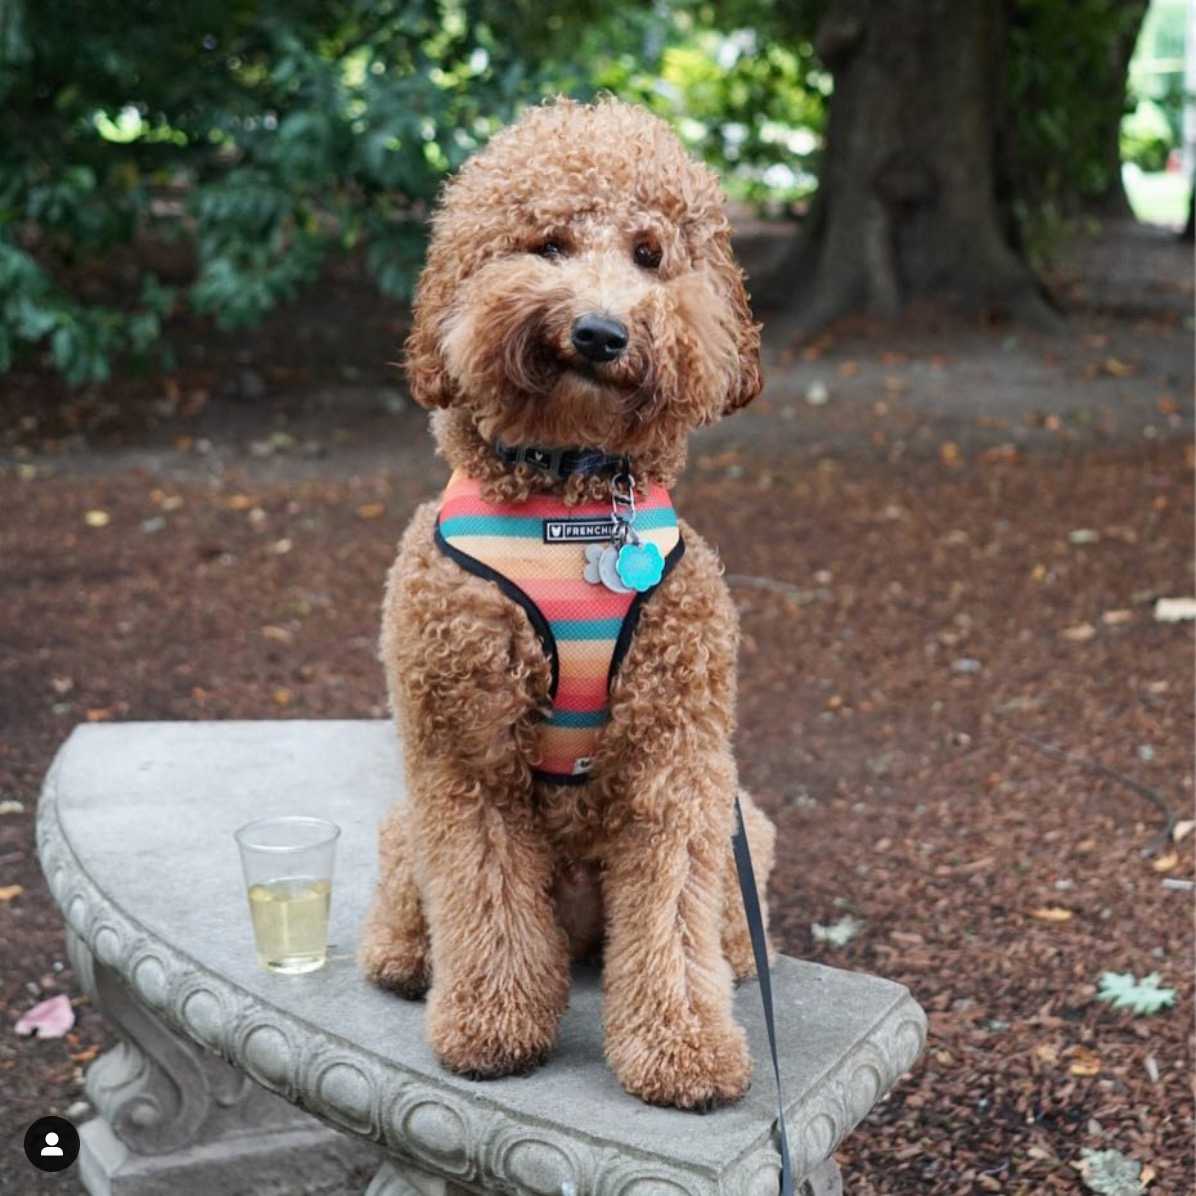 curly coated goldendoodle: theodoodlebear